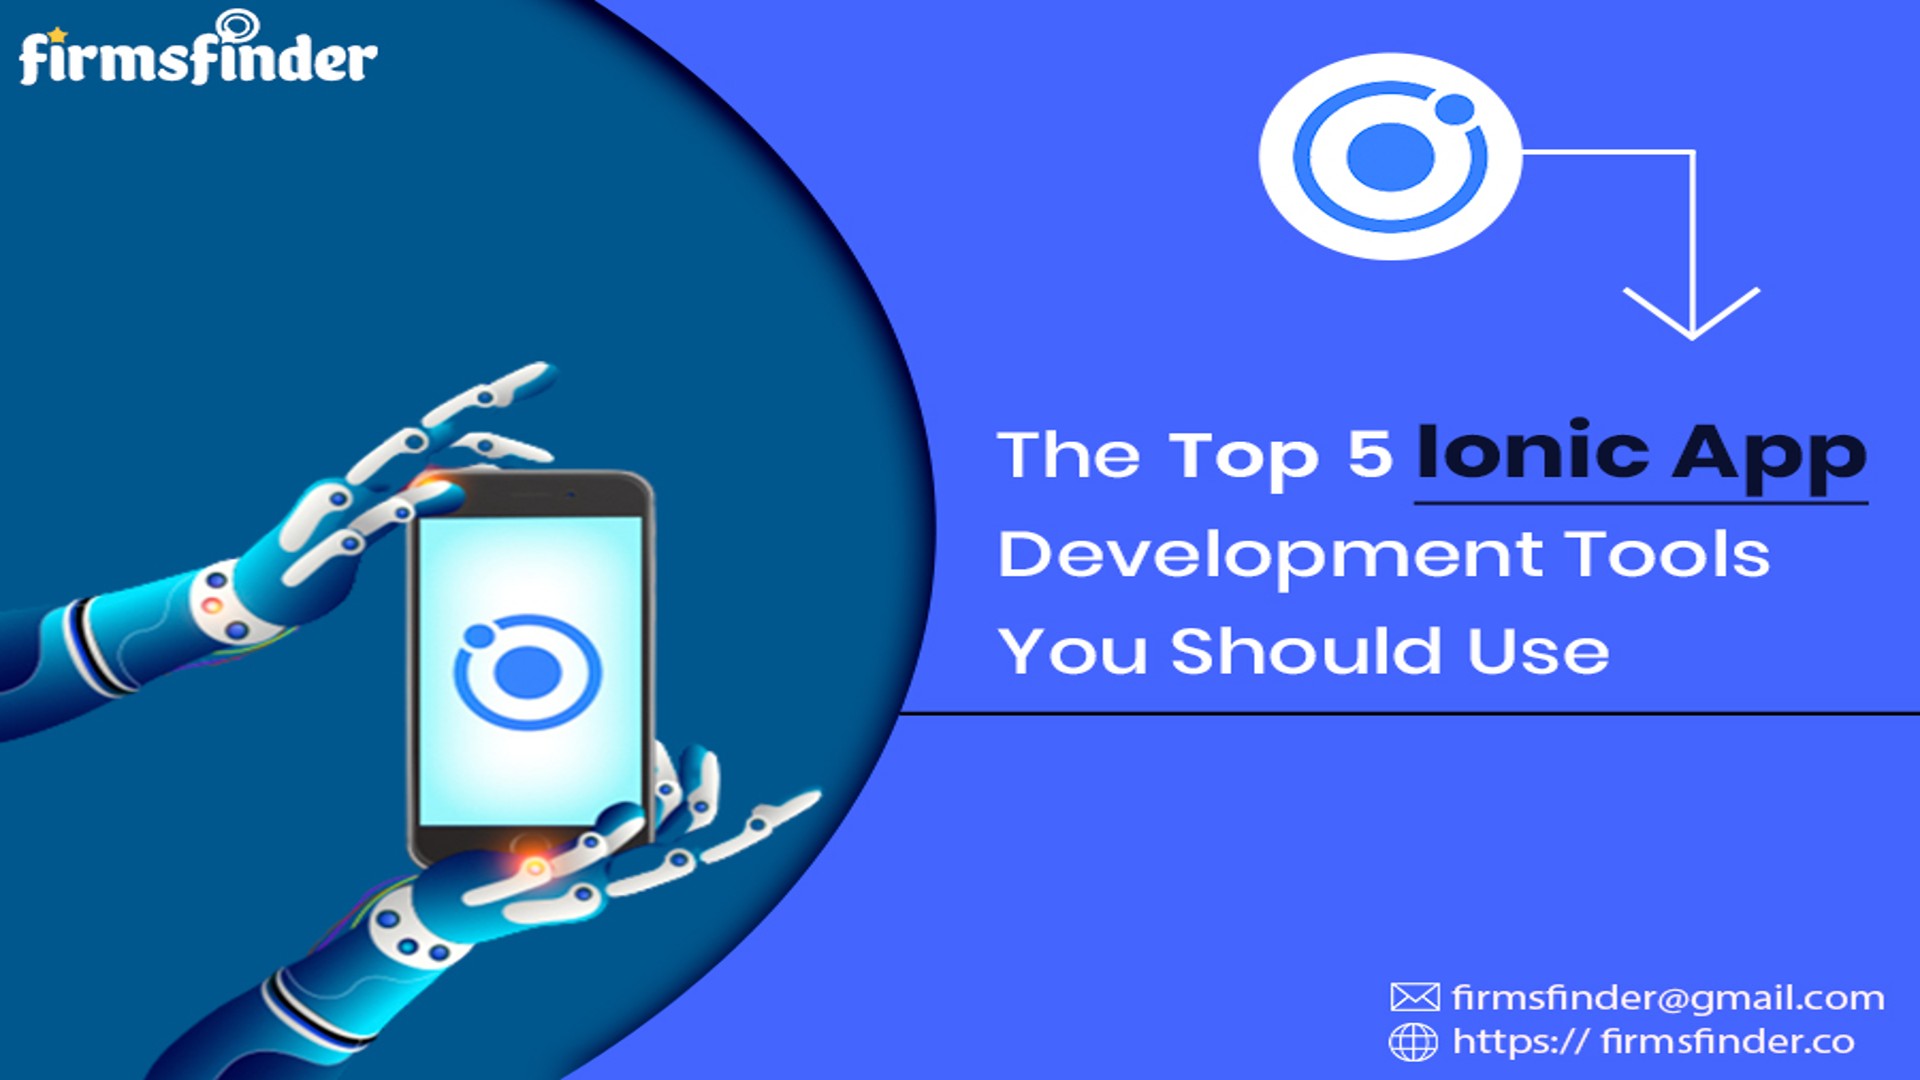 The Top 5 Ionic App Development Tools You Should Use